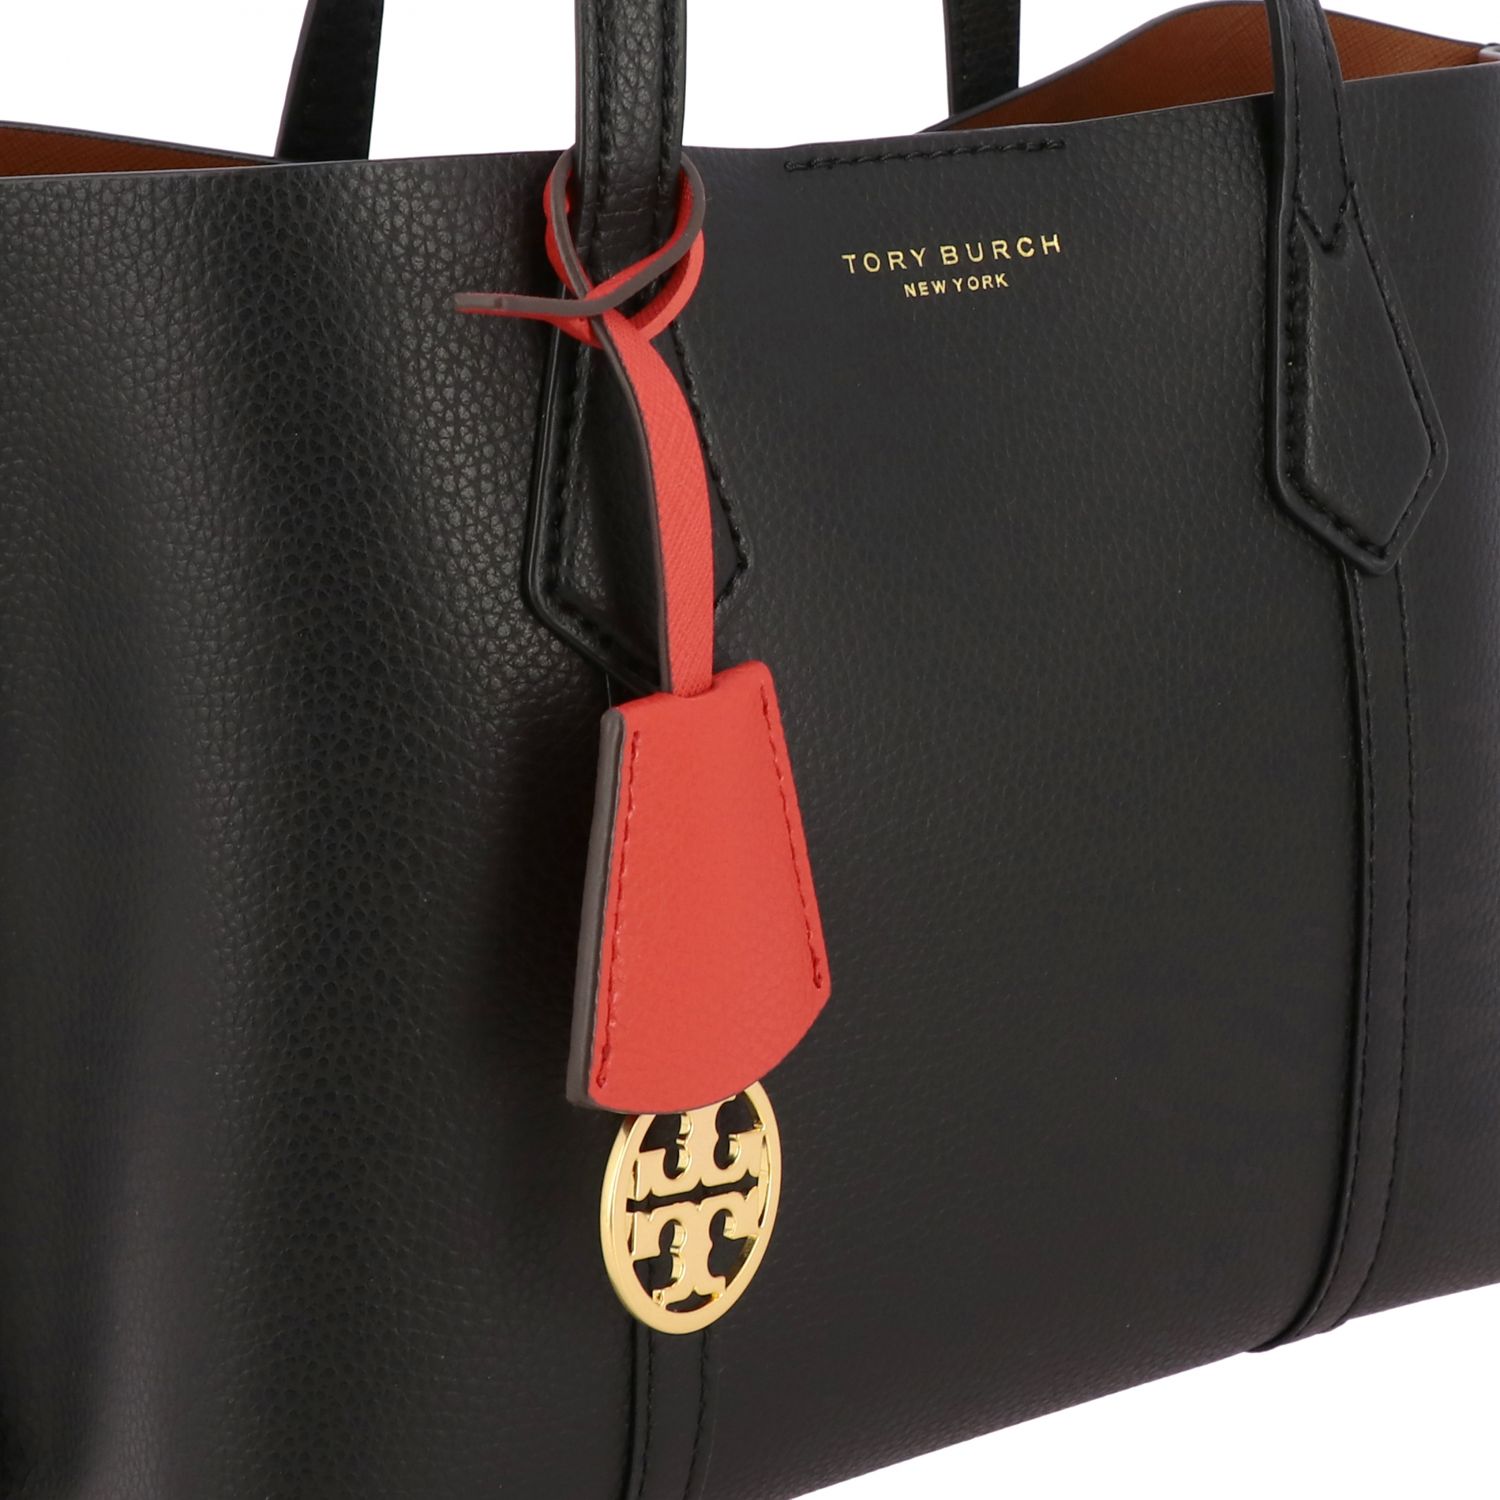 Tory Burch Outlet: tote bag in leather with logo | Tote Bags Tory Burch